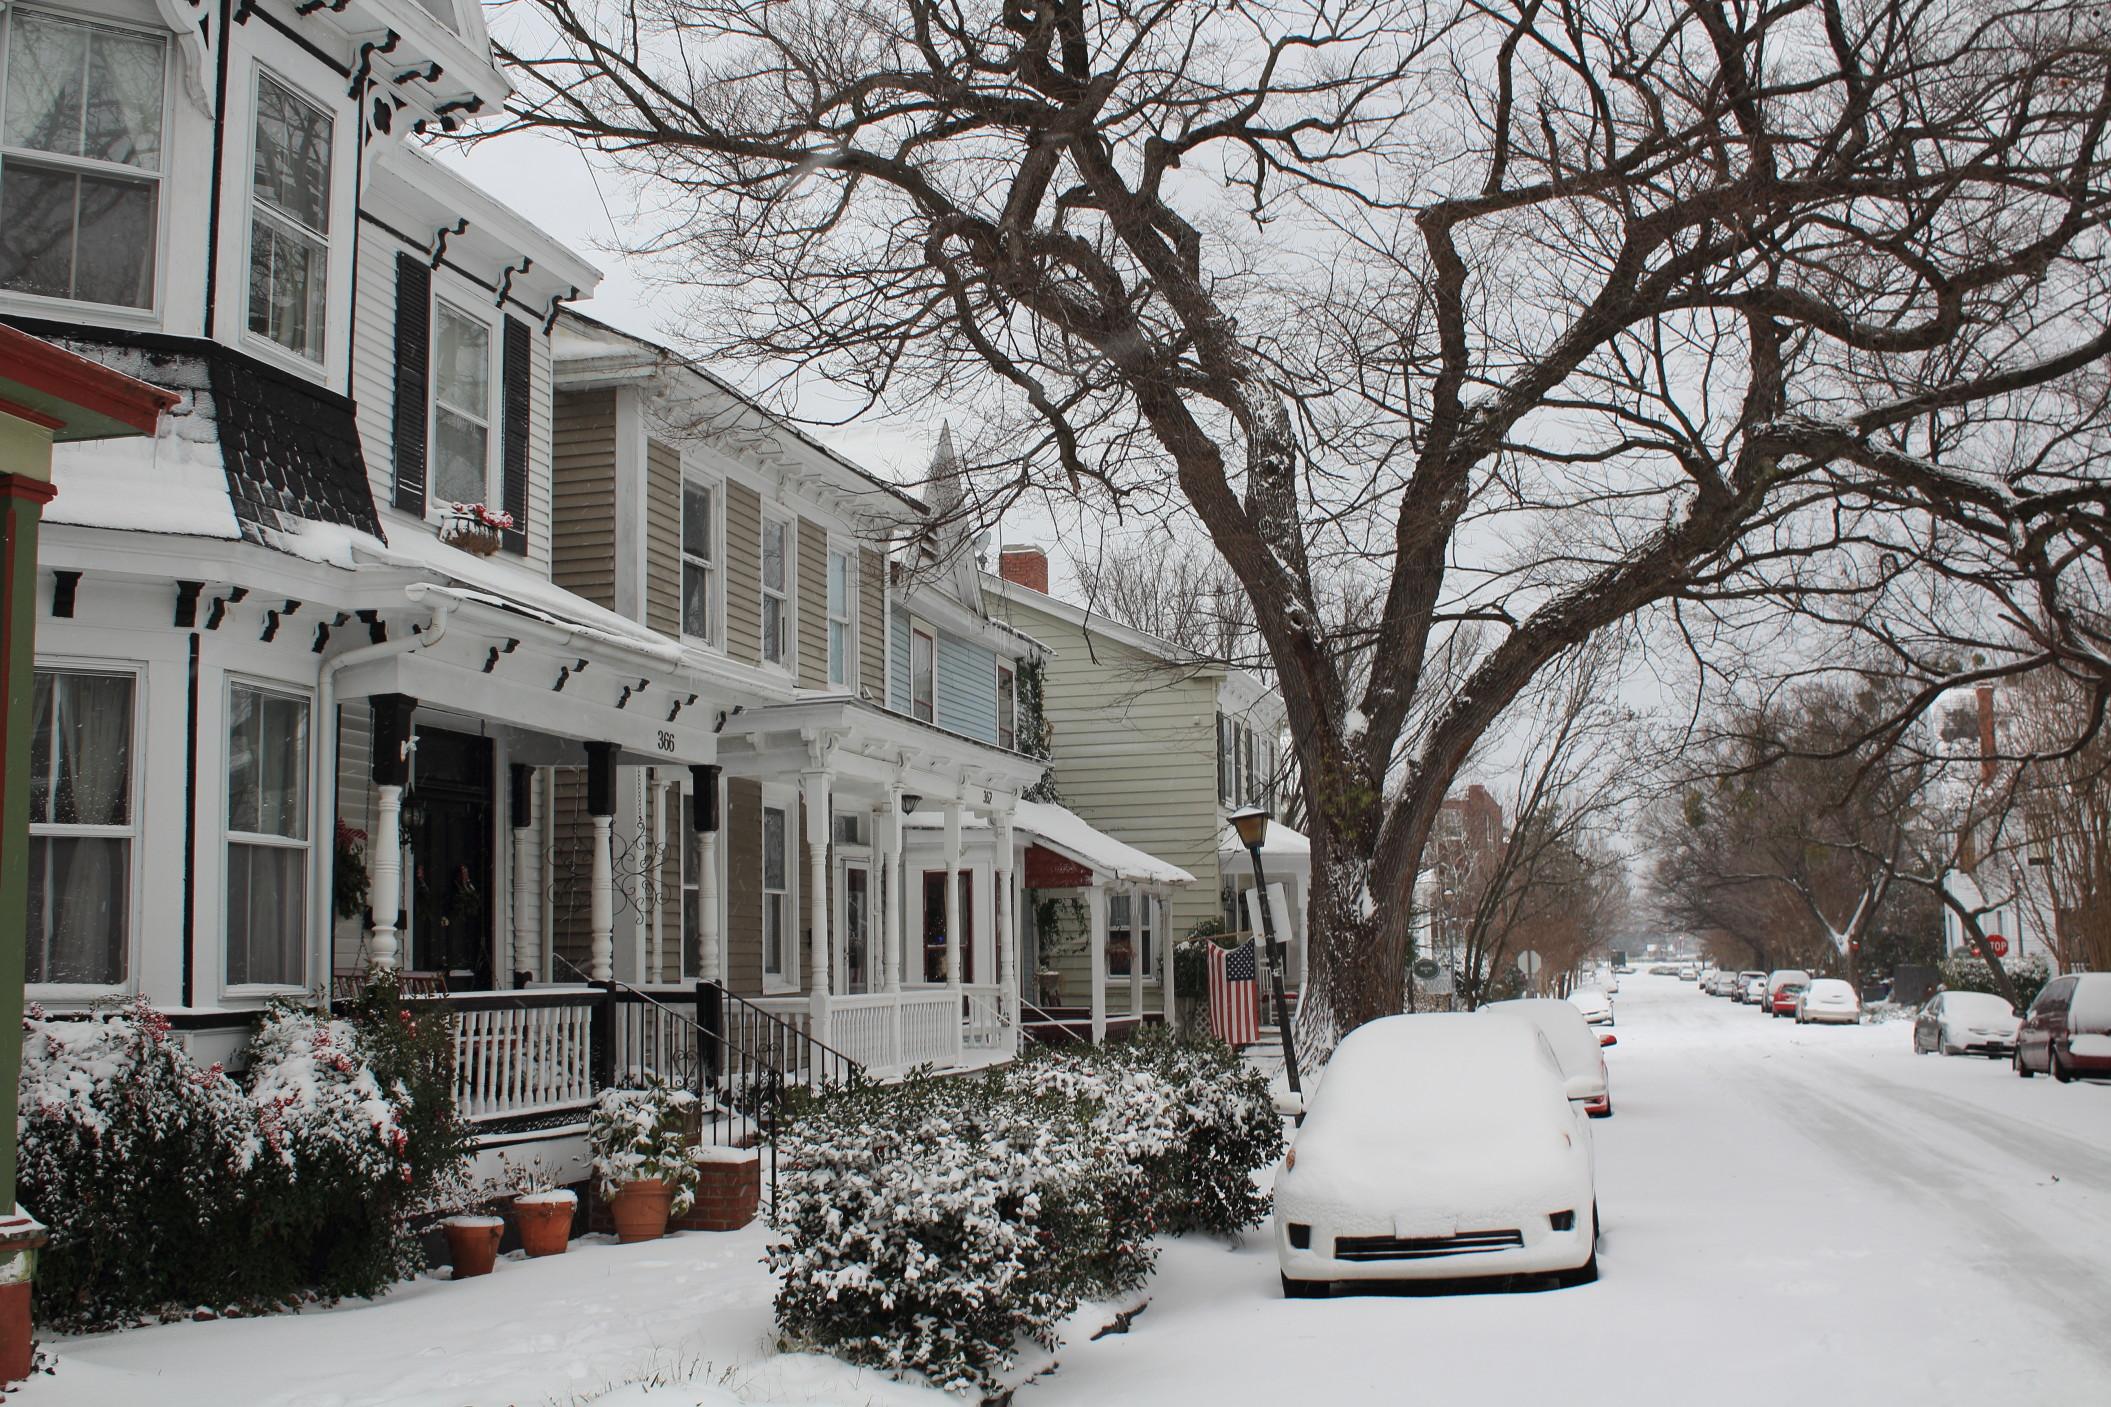 Every year East Coast drivers endure months of freezing winter weather.